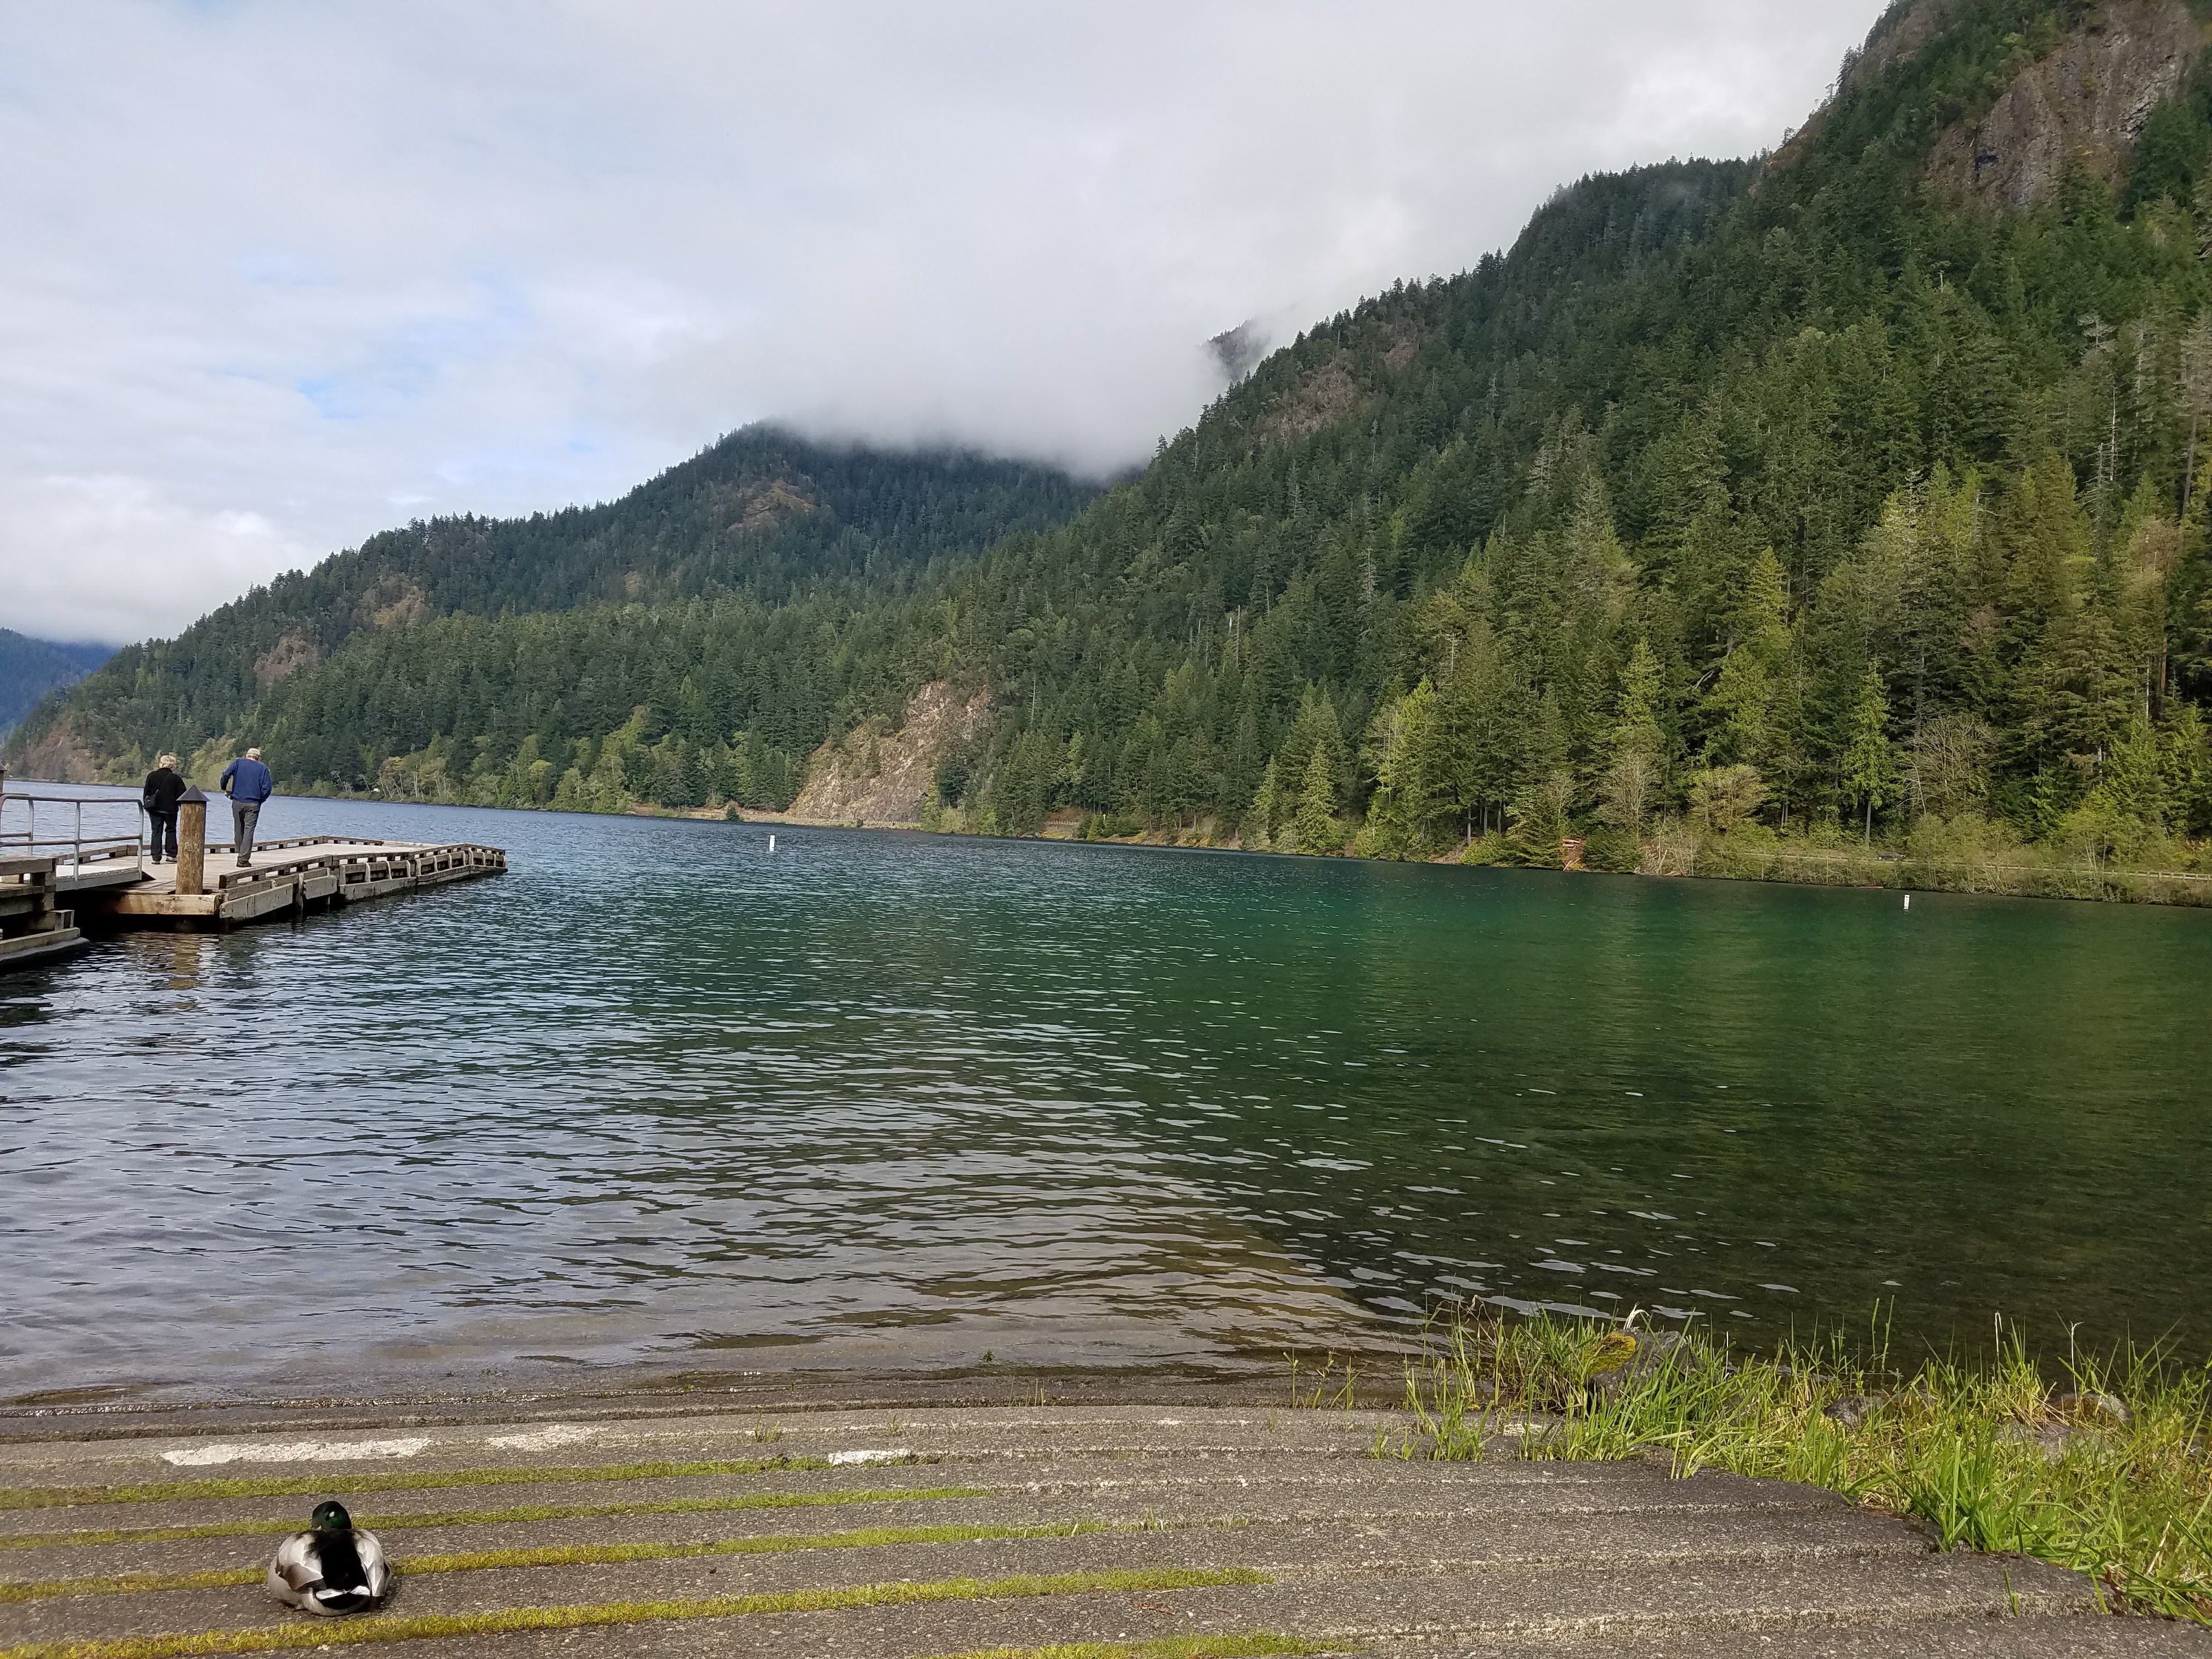 Crescent Lake in Olympic National Park - view of a dock, a duck, and cloudy mountains